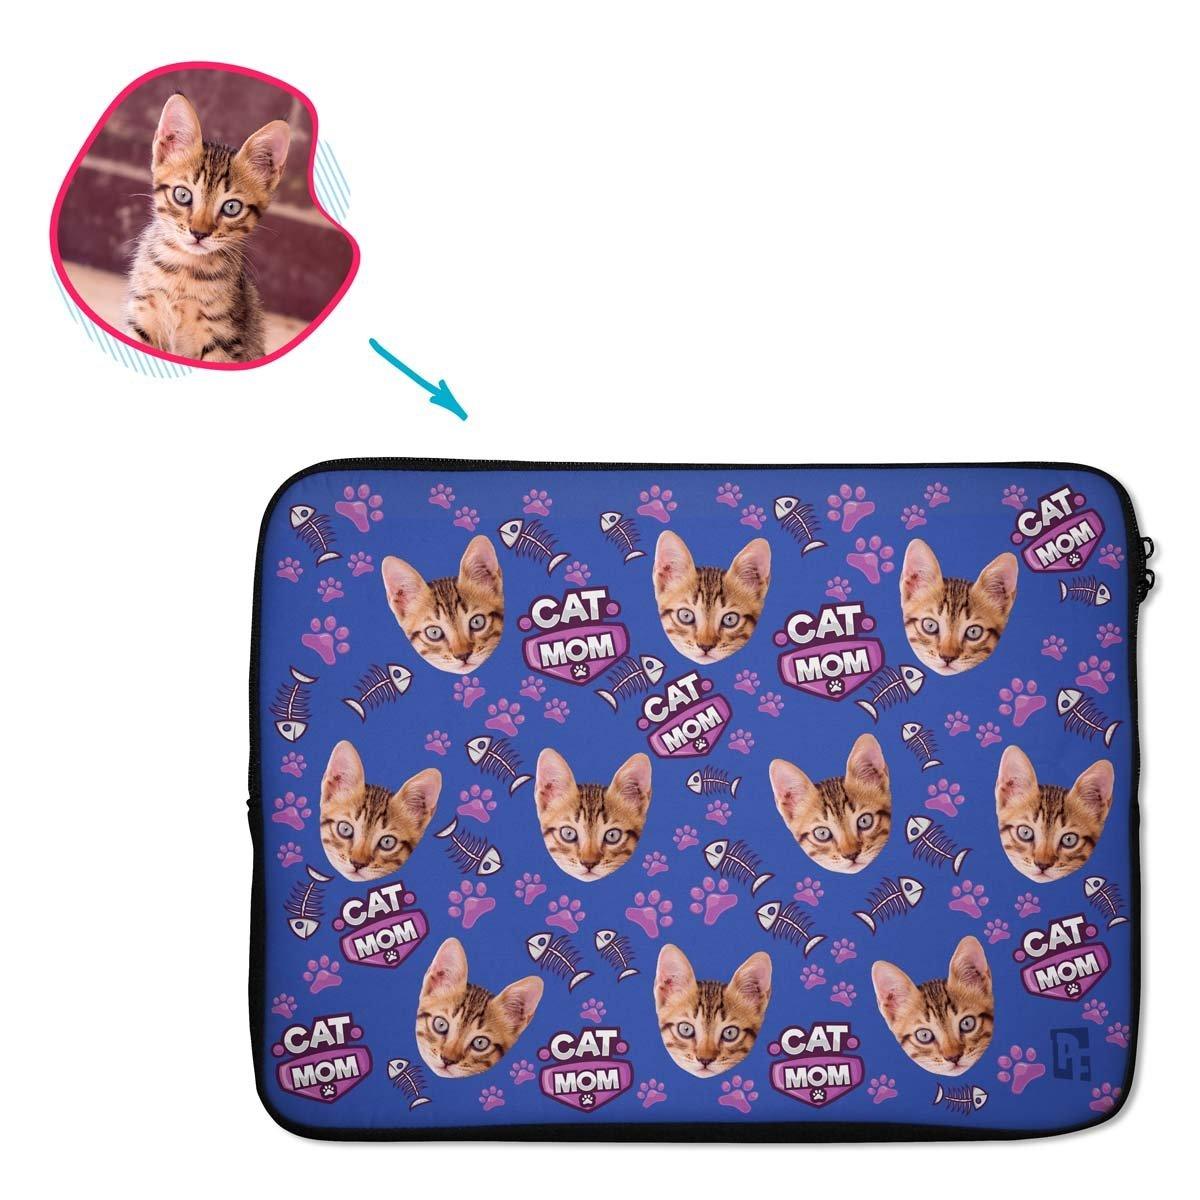 darkblue Cat Mom laptop sleeve personalized with photo of face printed on them